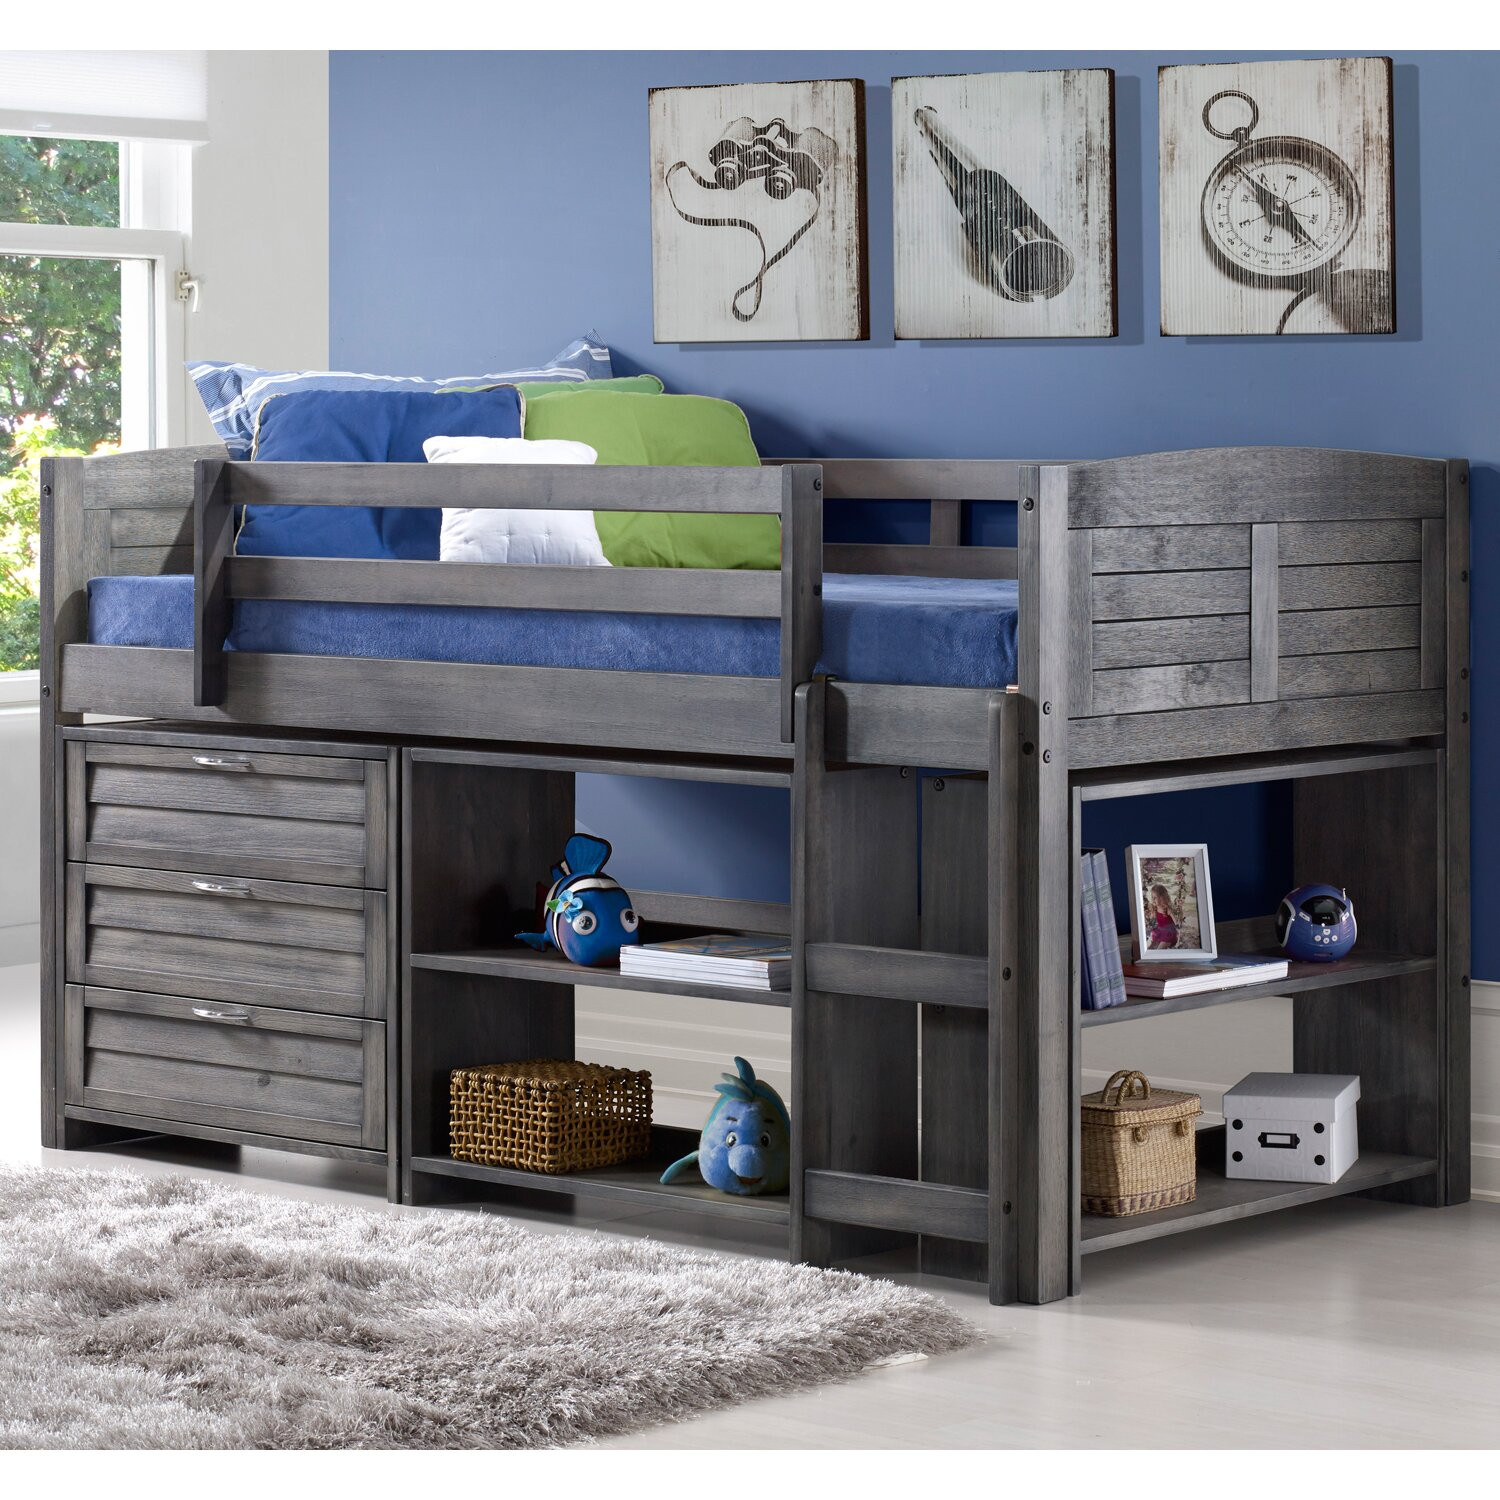 Kids Loft Bed With Storage
 Donco Kids Louver Twin Low Loft Bed with Storage